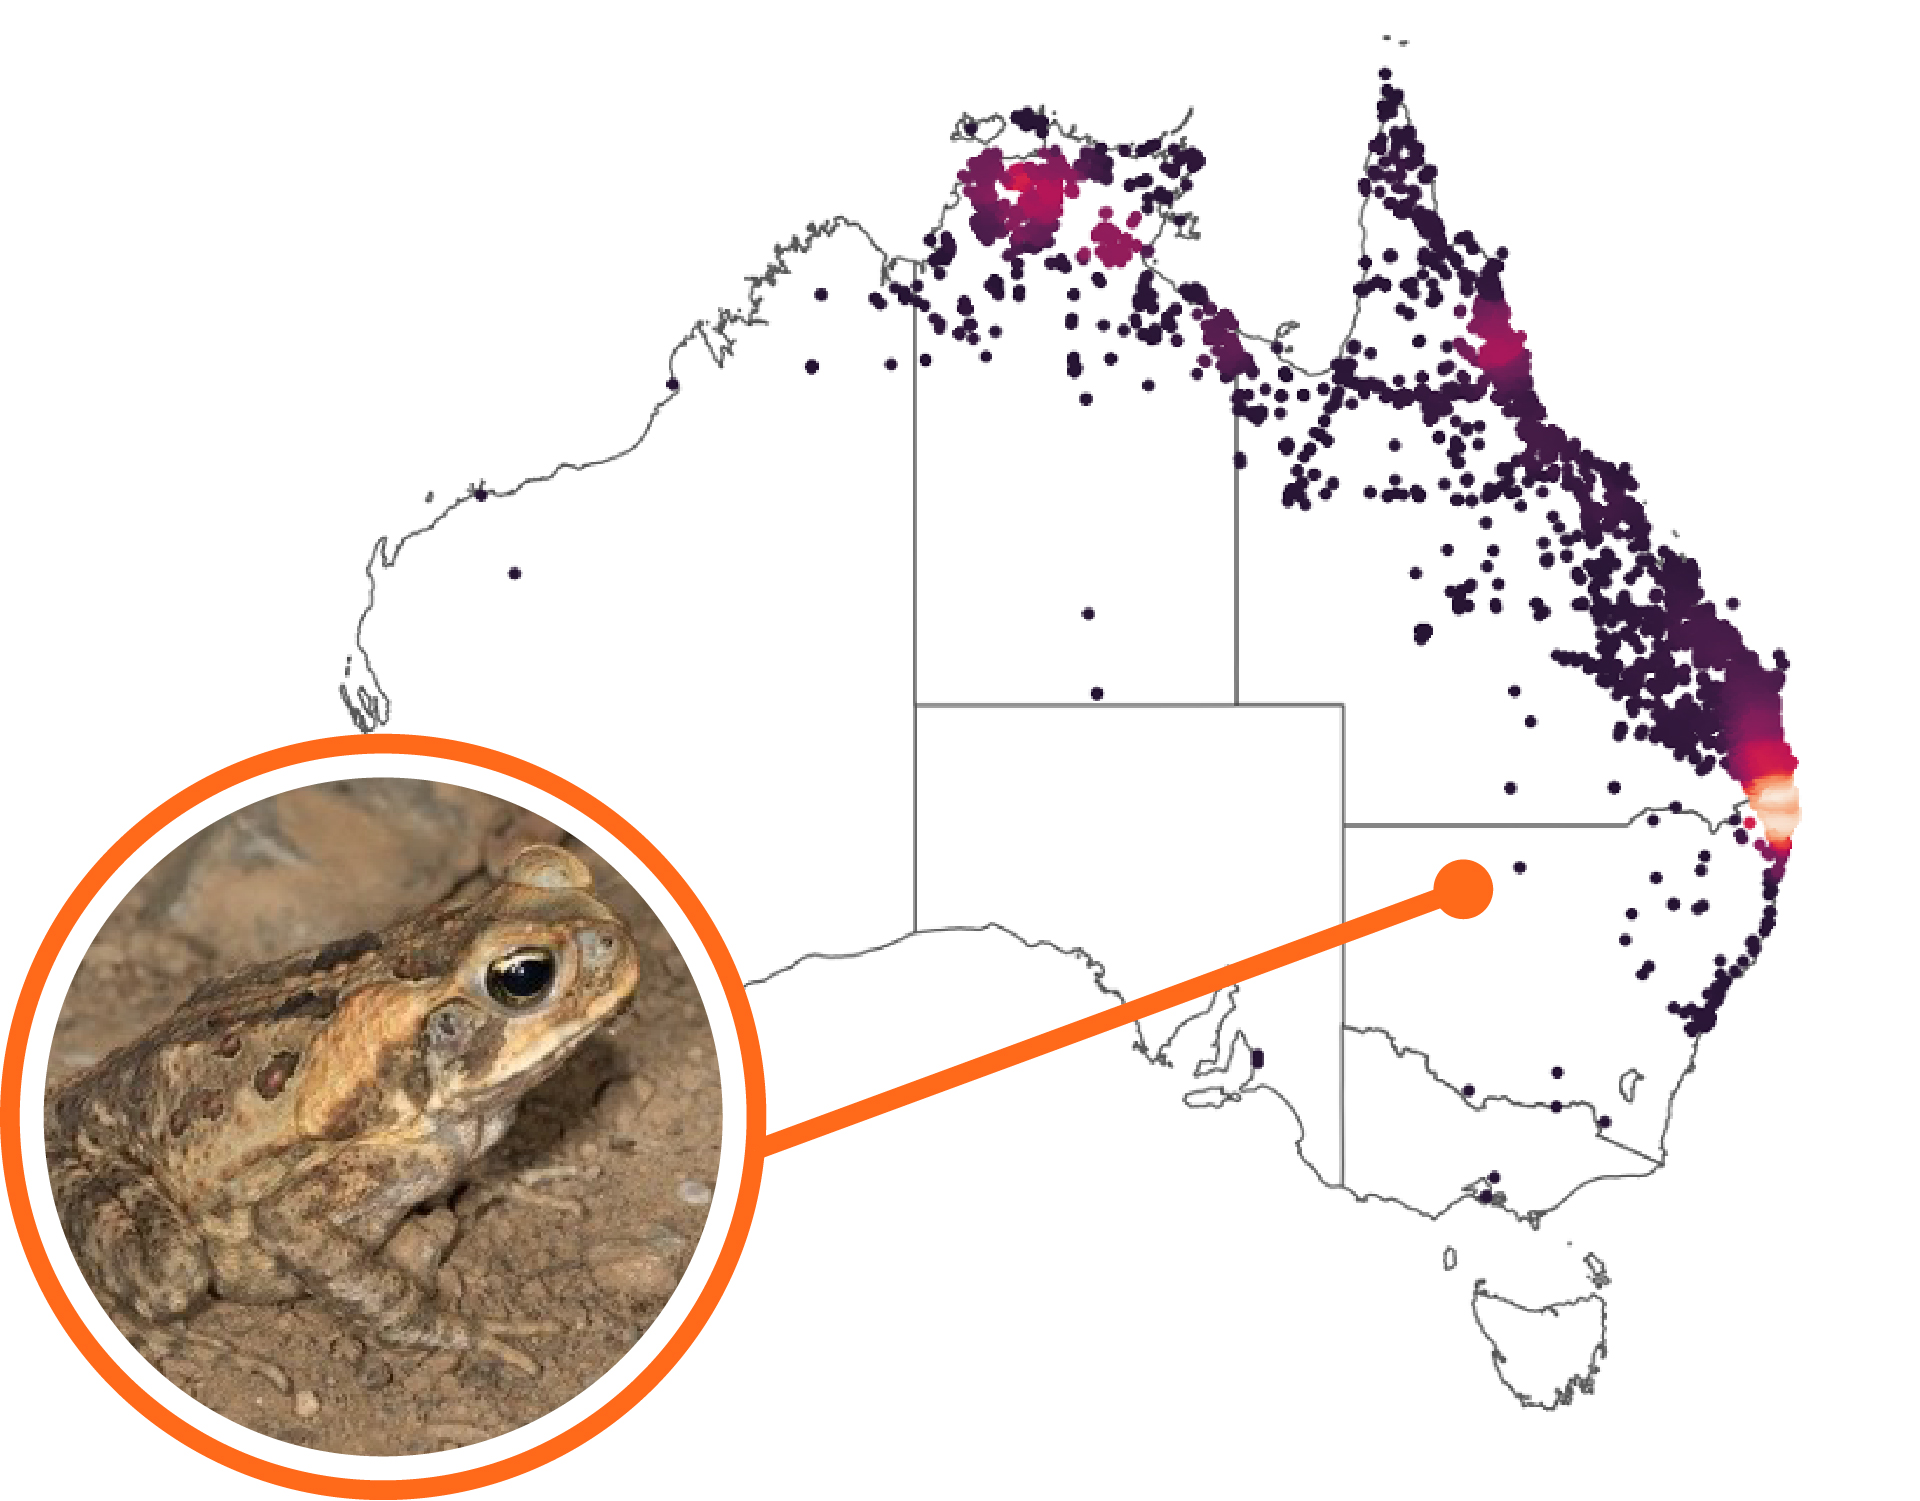 The spatial distribution of Cane Toads